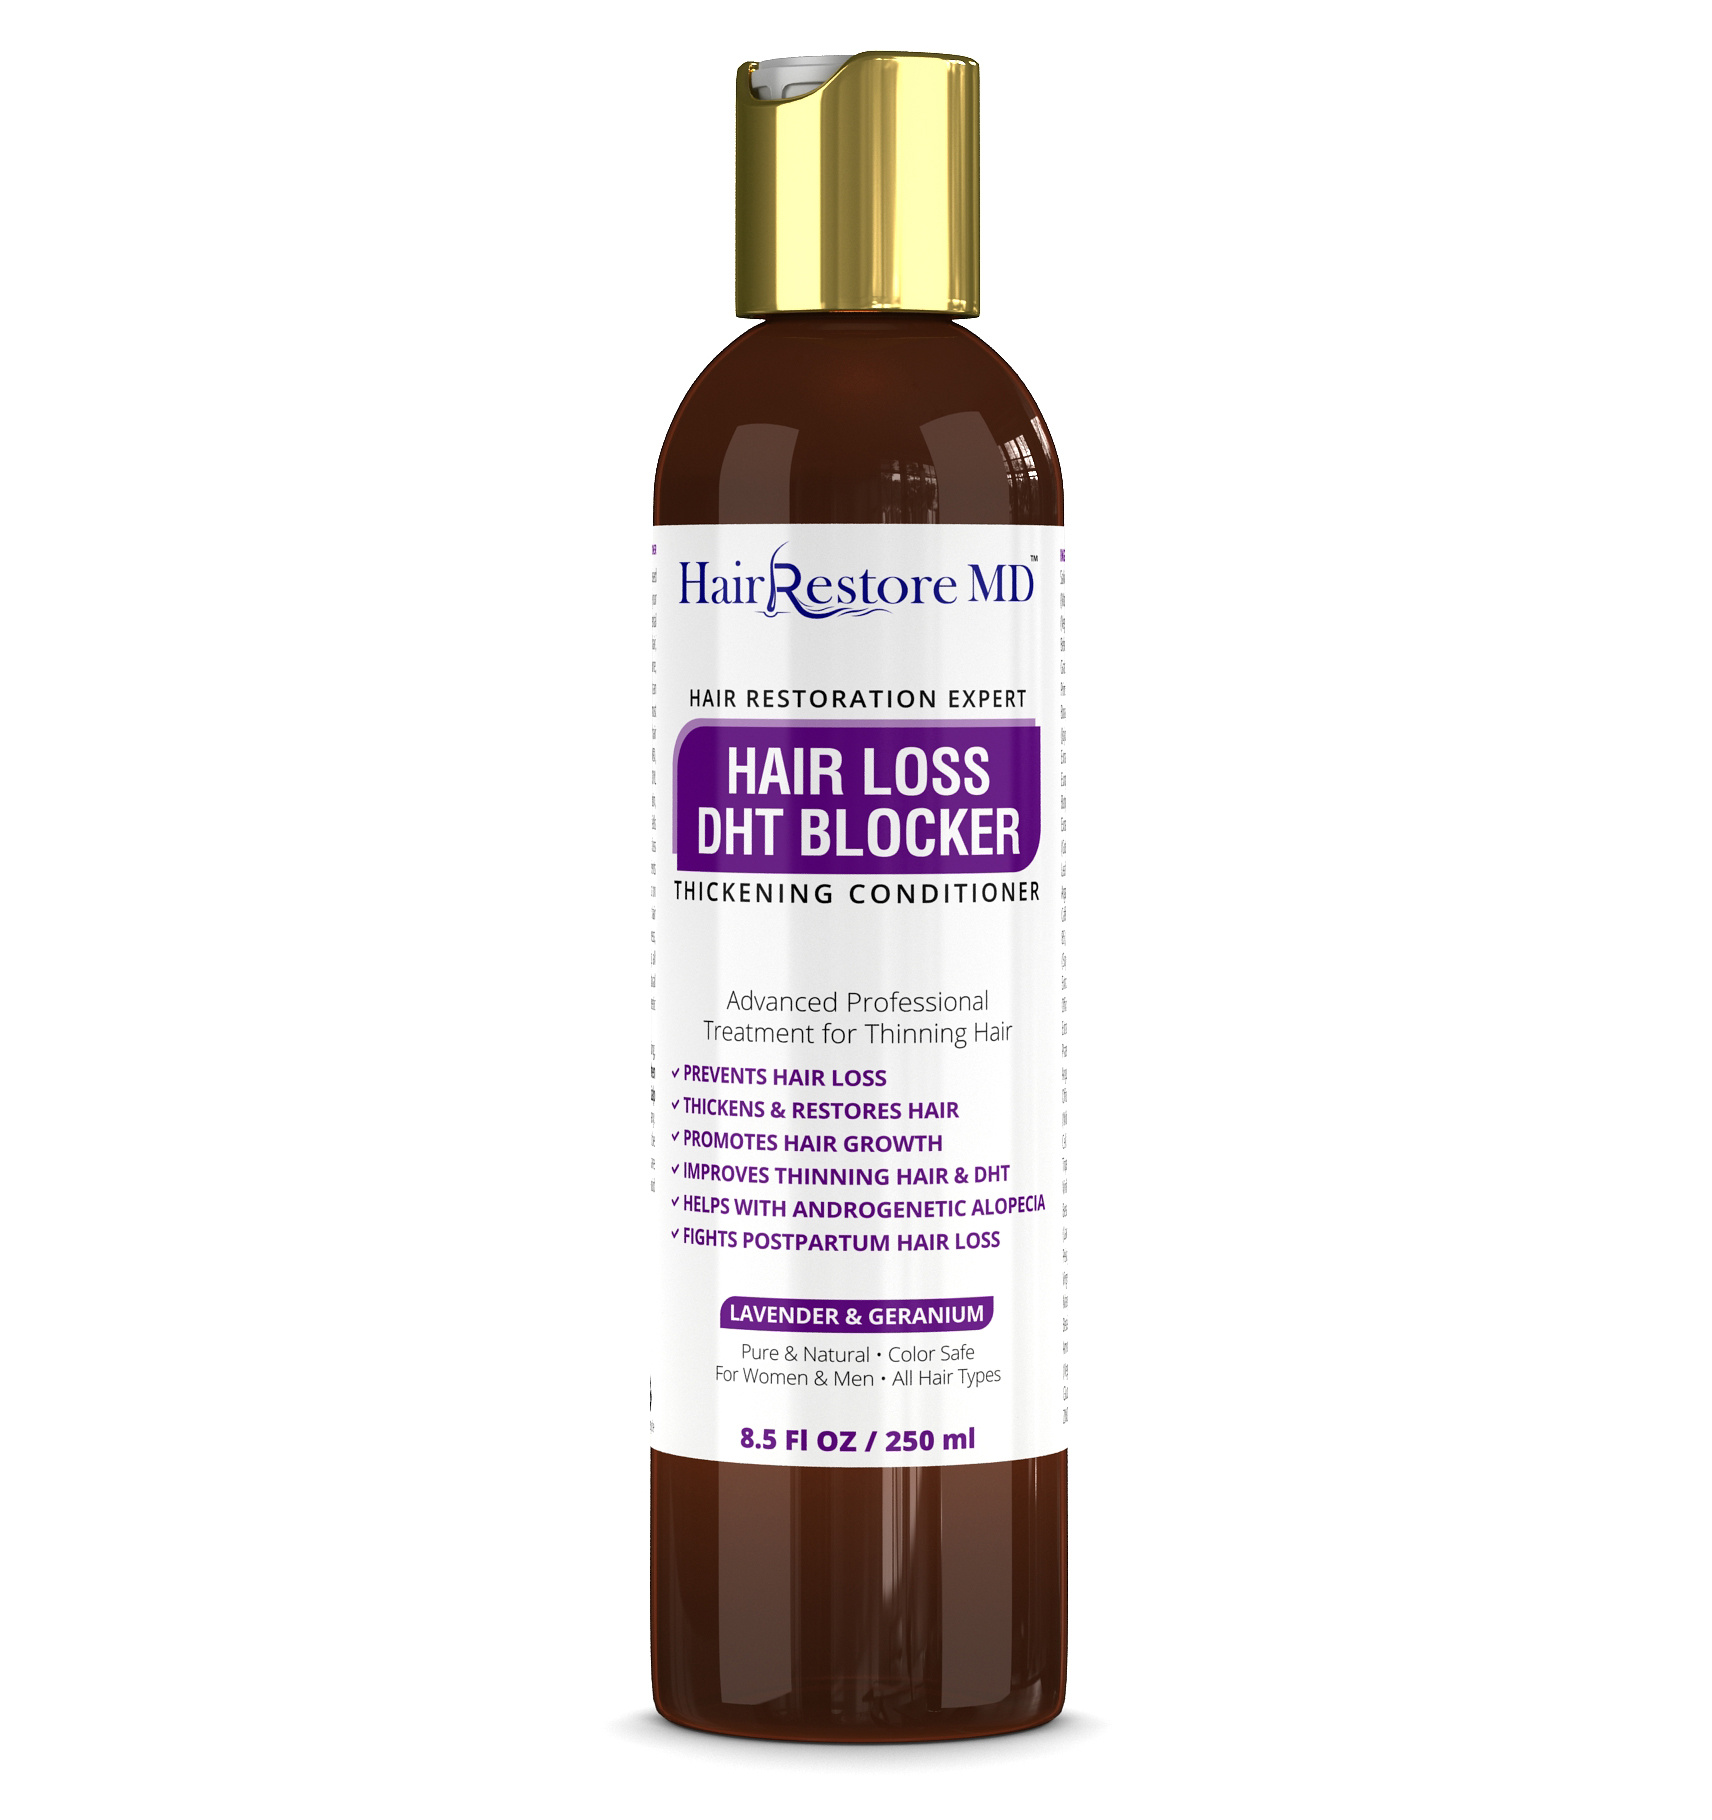 Hair Loss DHT Blocker Thickening Conditioner Lavender & Geranium. Alopecia  Prevention. Doctor Developed - Botanical Green Care